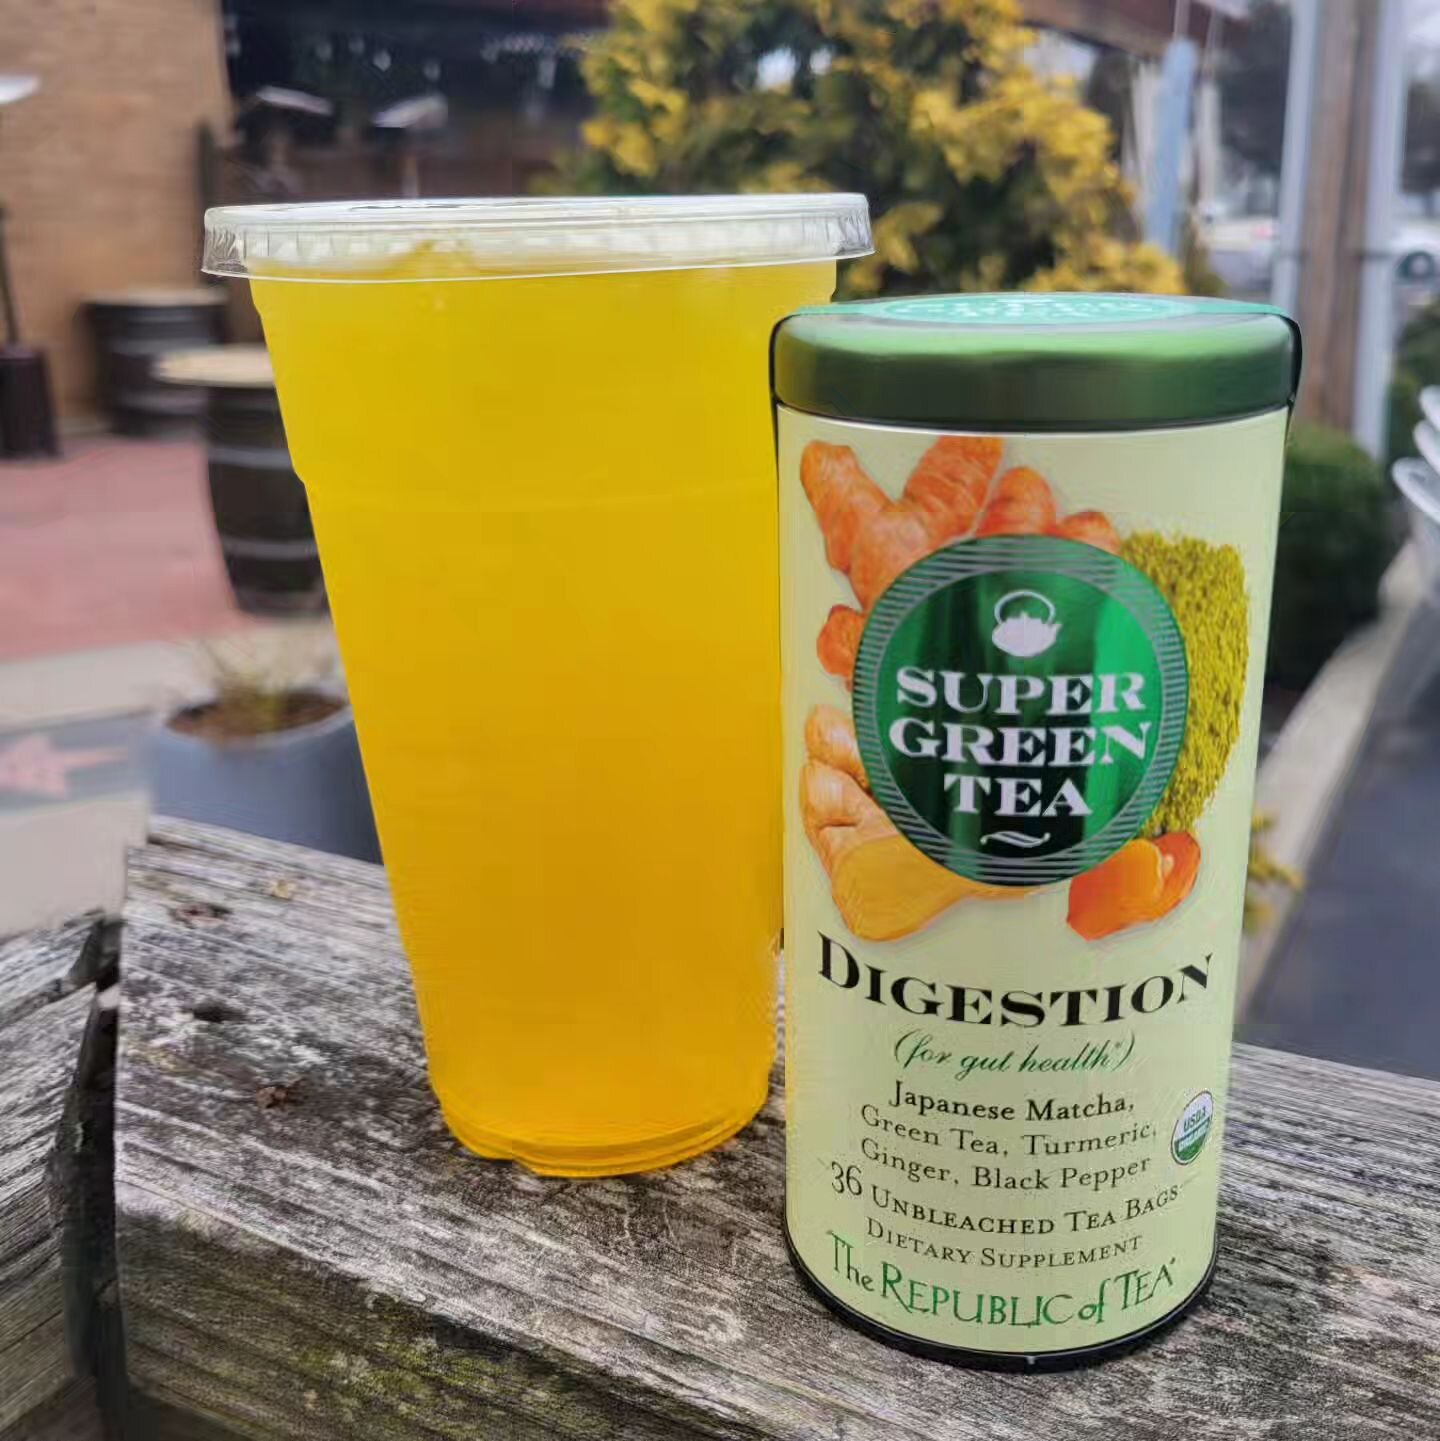 On Superbowl Sunday, we need all the digestive aid we can get with all the snacks and drinks on the horizon!
🍵
Our Digestion Tea from @republicoftea is what we're sipping all day to set us up for success!
🌿
Japanese Matcha, turmeric, ginger, and bl